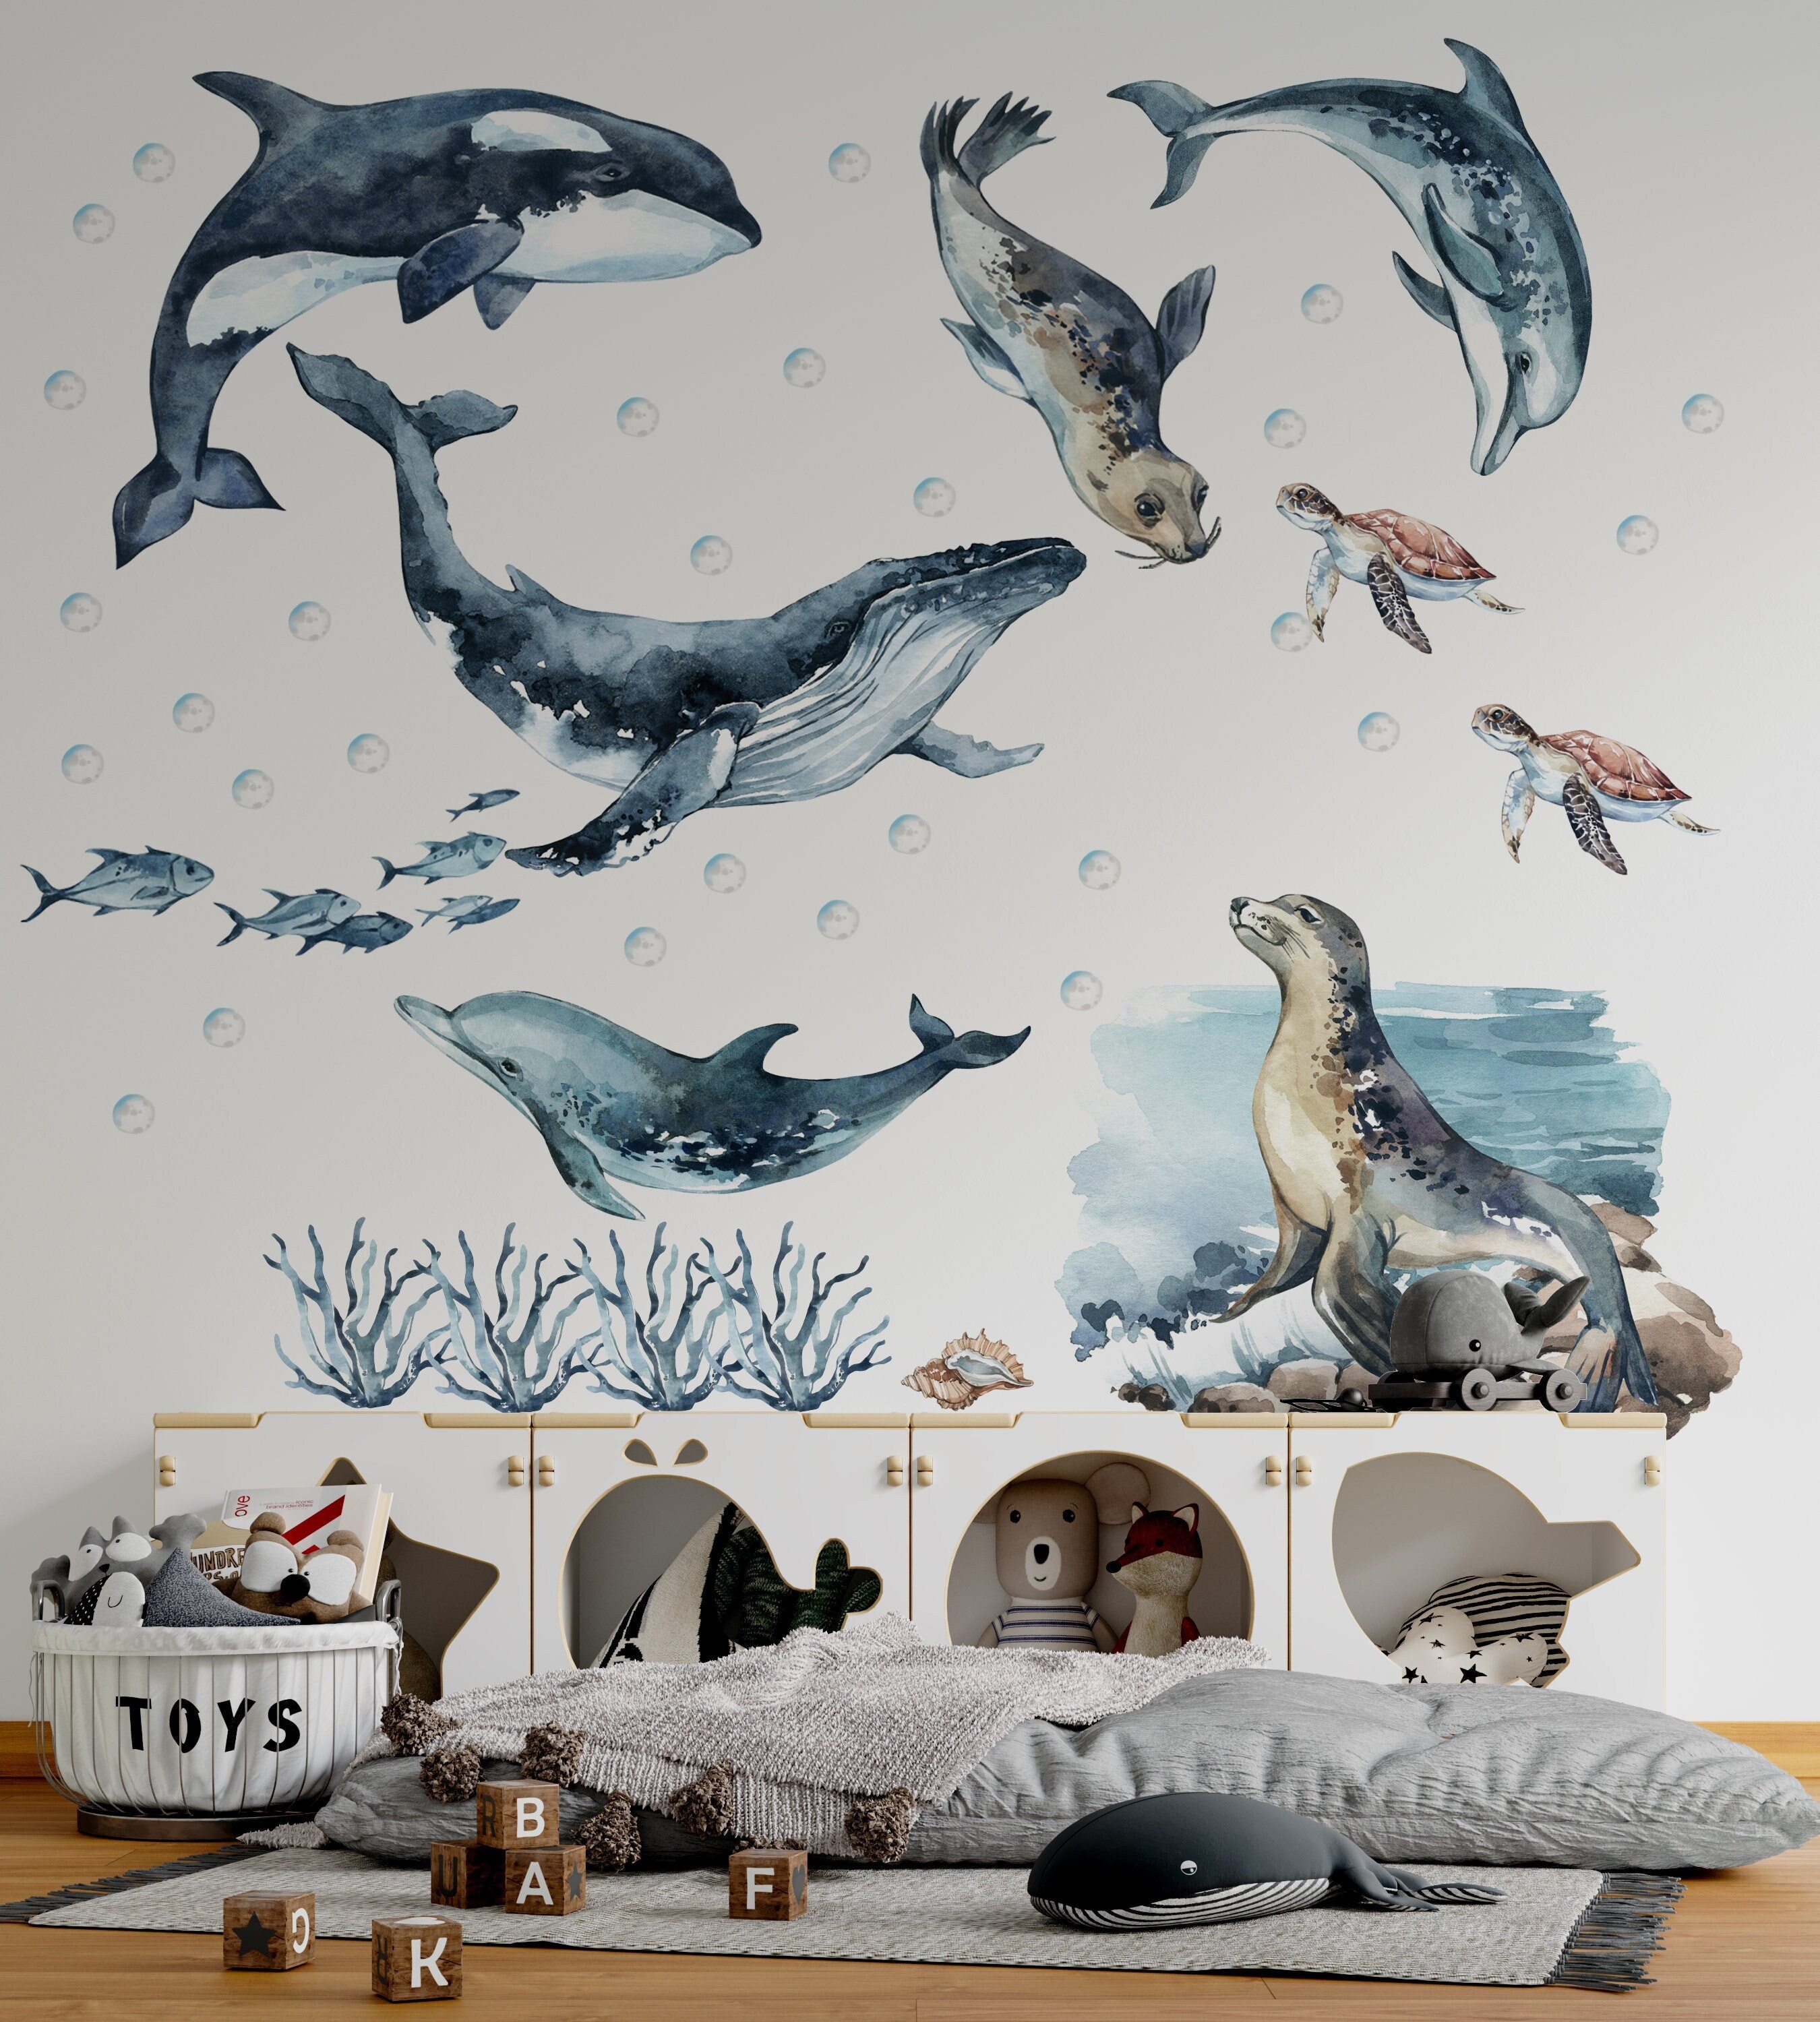 3D Dolphin 1444 Wall Paper Print Decal Deco Wall Mural Self-Adhesive  Wallpaper AJ US Lv (Woven Paper (Need Glue), 【164”x100”】 416x254cm(WxH)) 